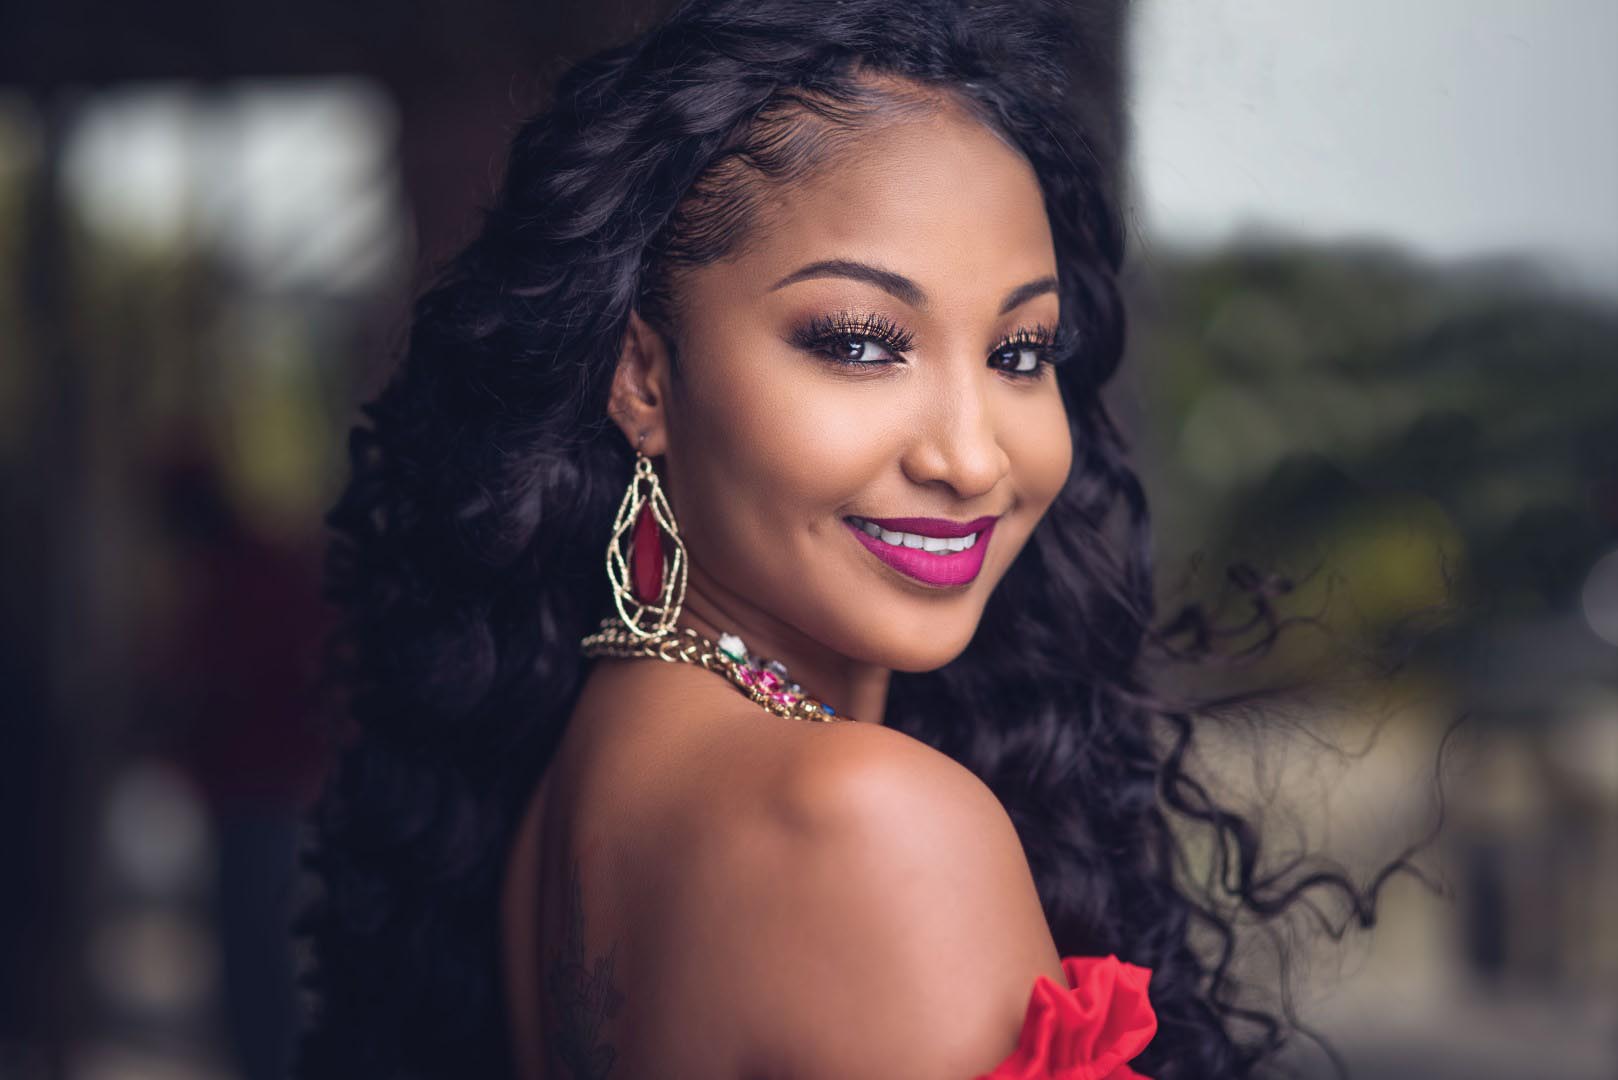 Throwback: Shenseea - The World is Hers for the Taking